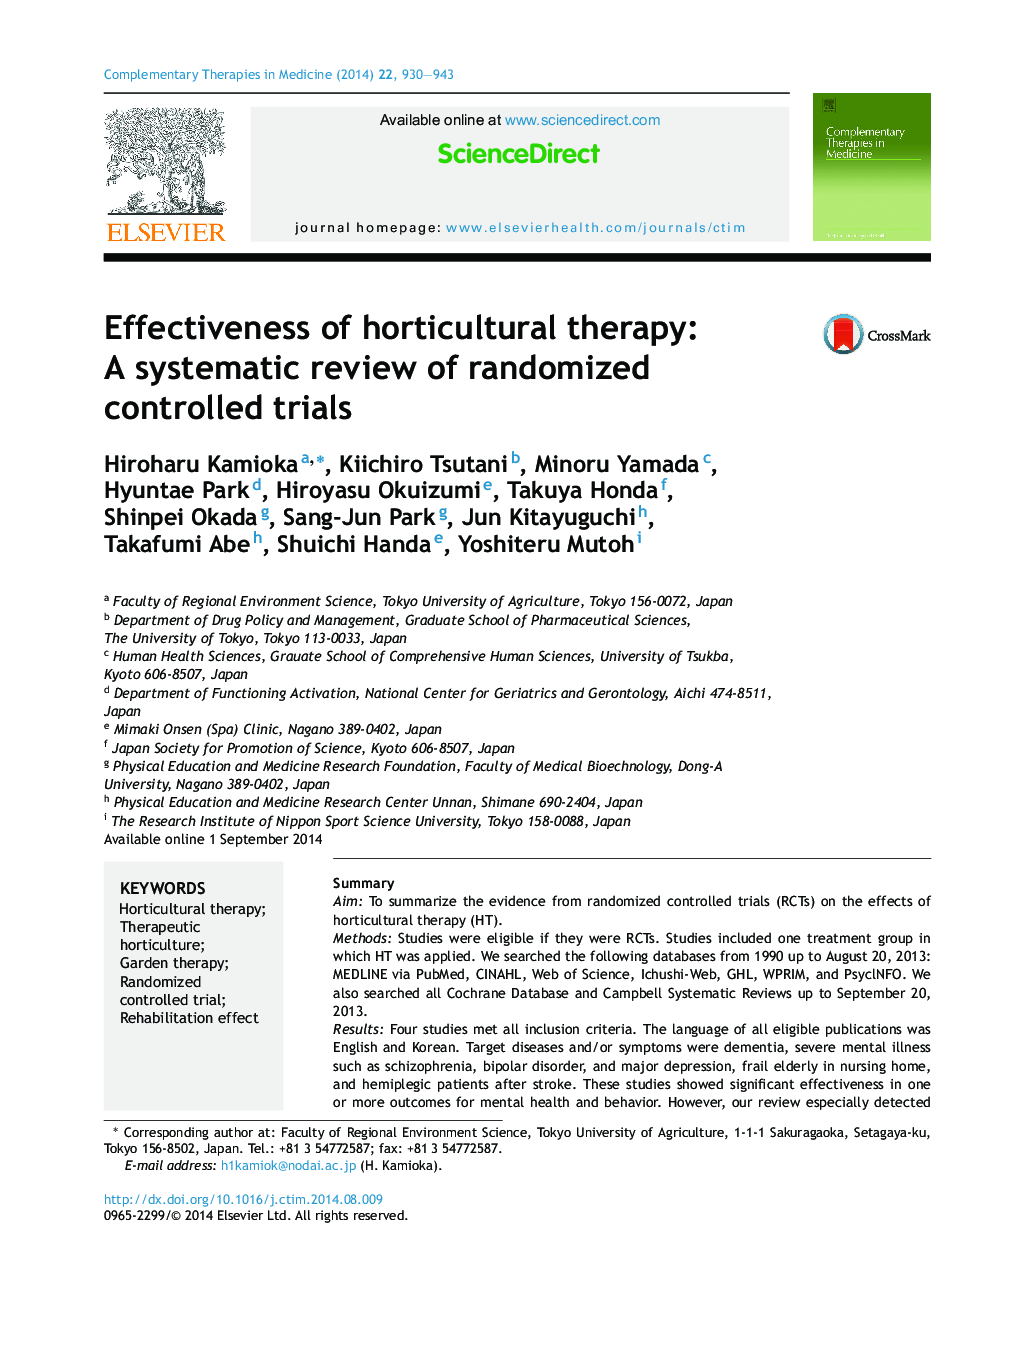 Effectiveness of horticultural therapy: A systematic review of randomized controlled trials